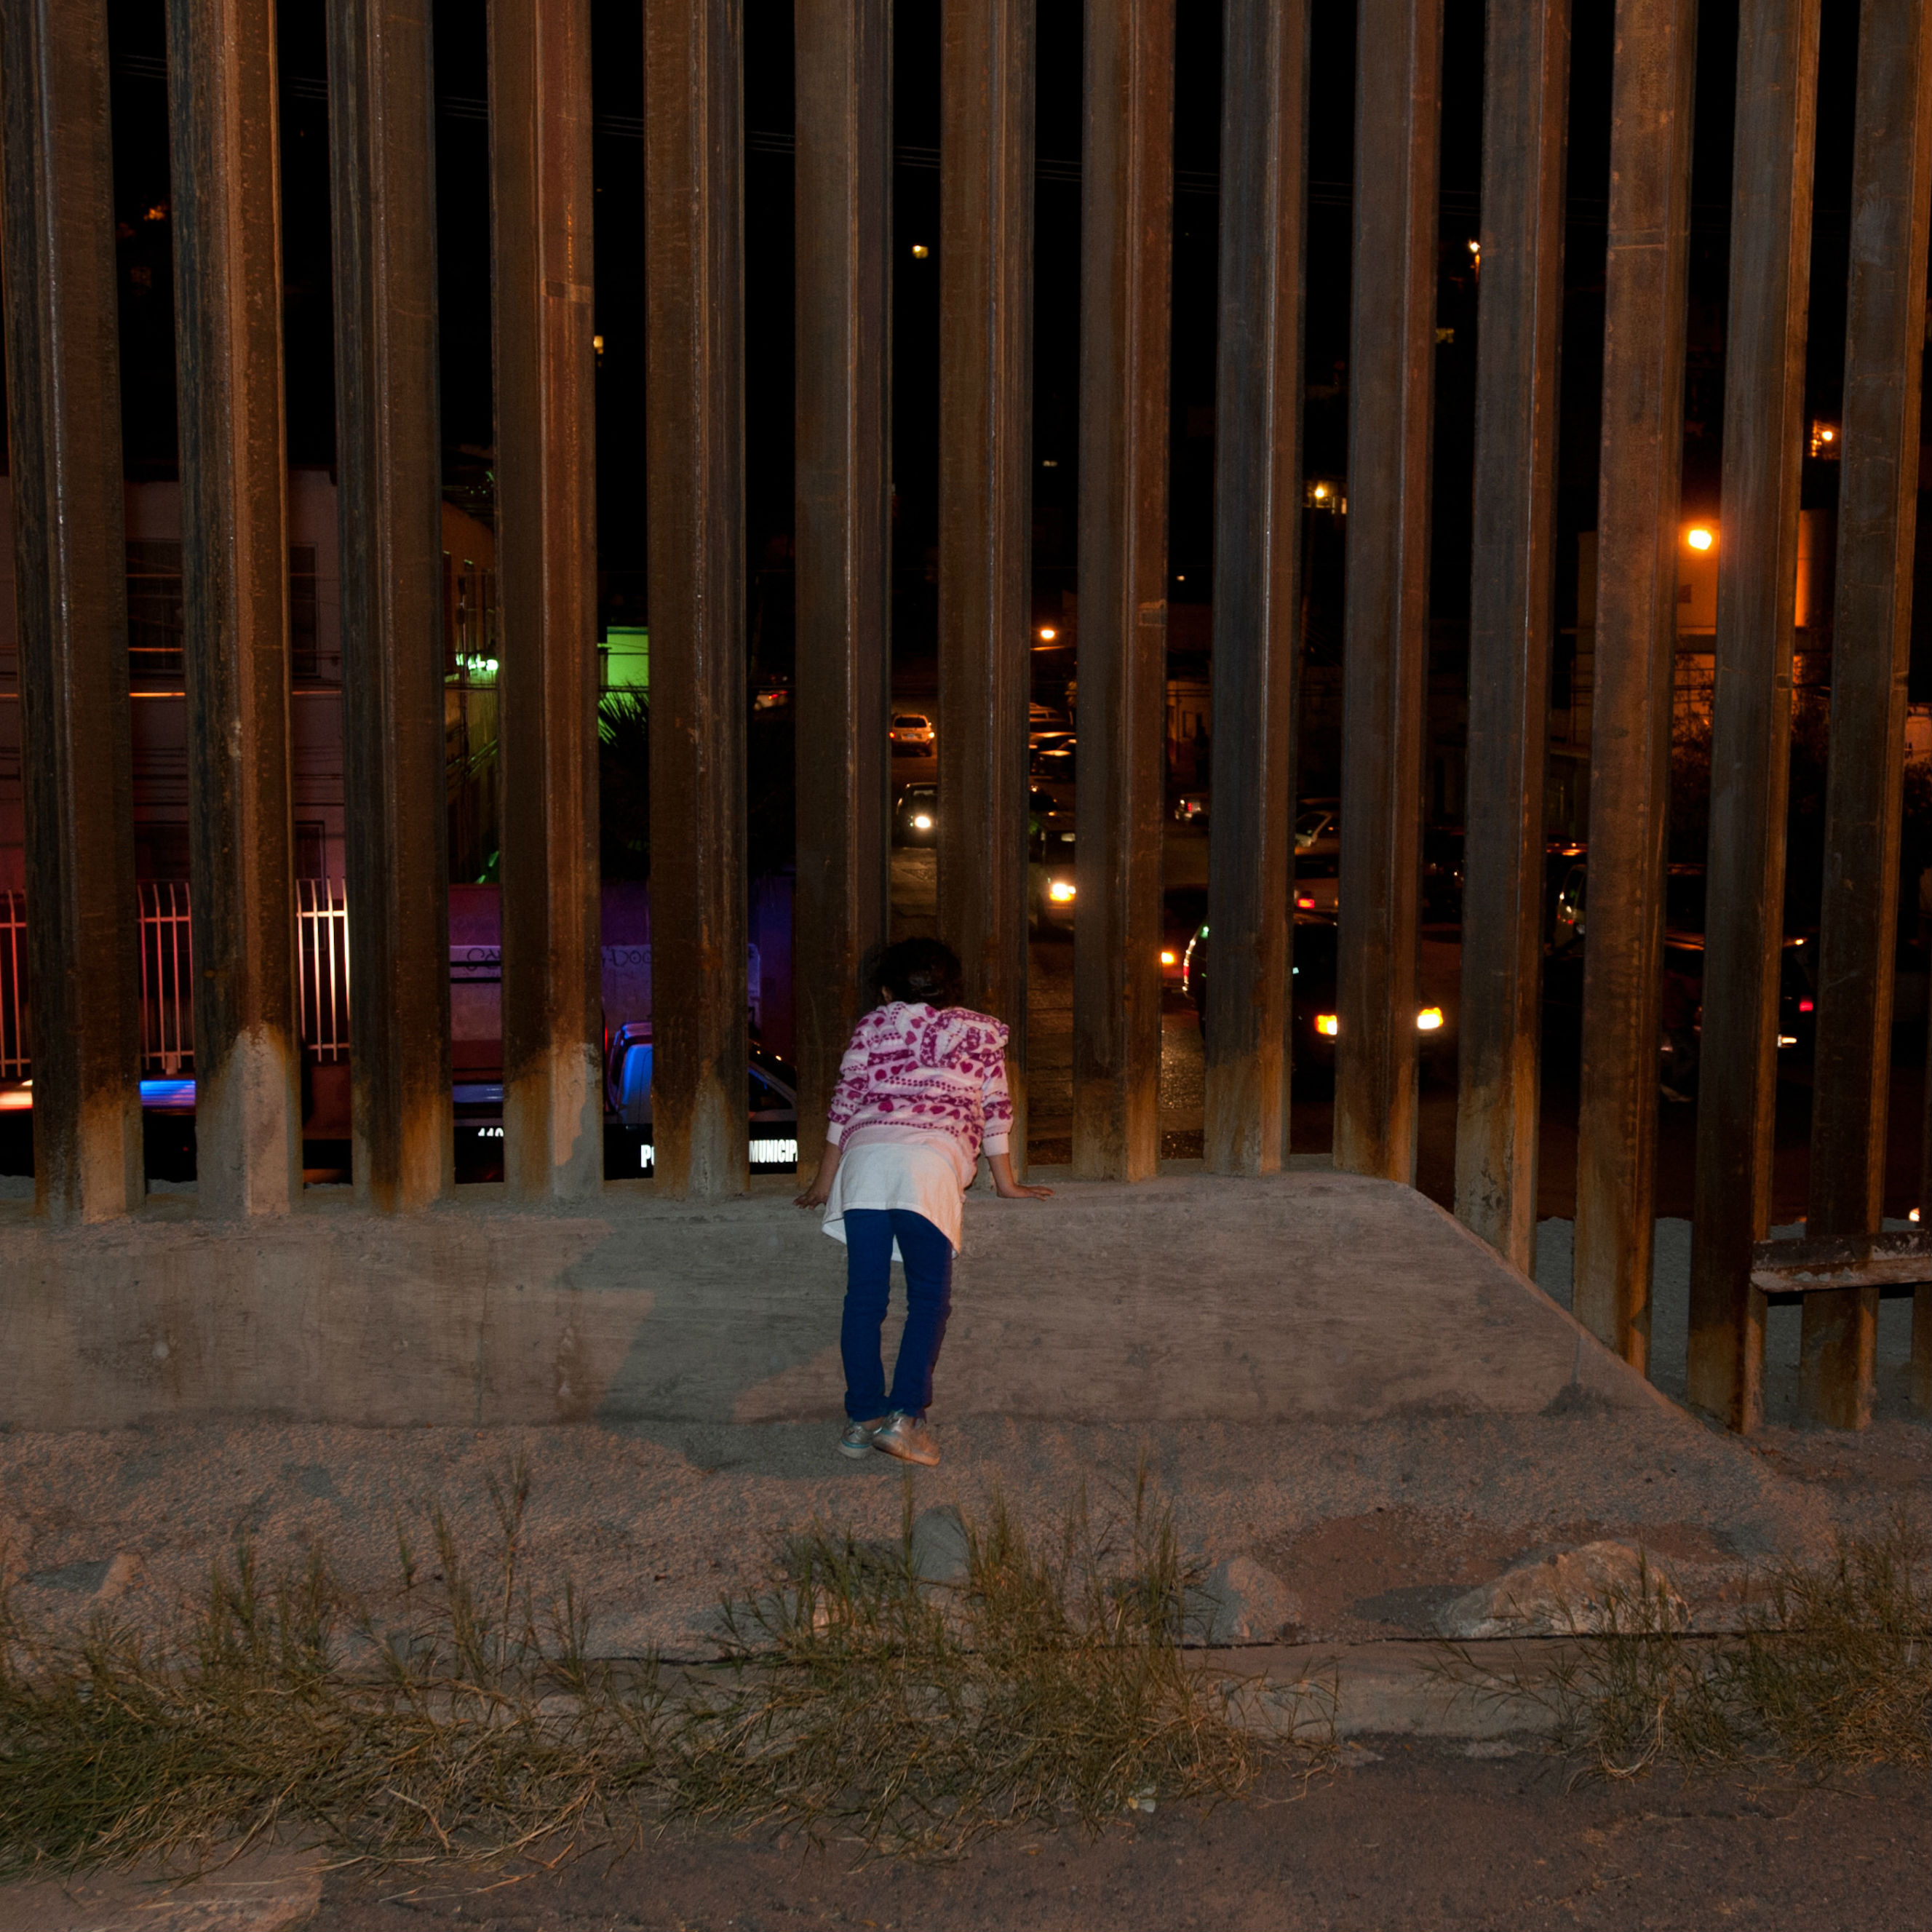 US-Mexico border bishops call for dignity for migrants